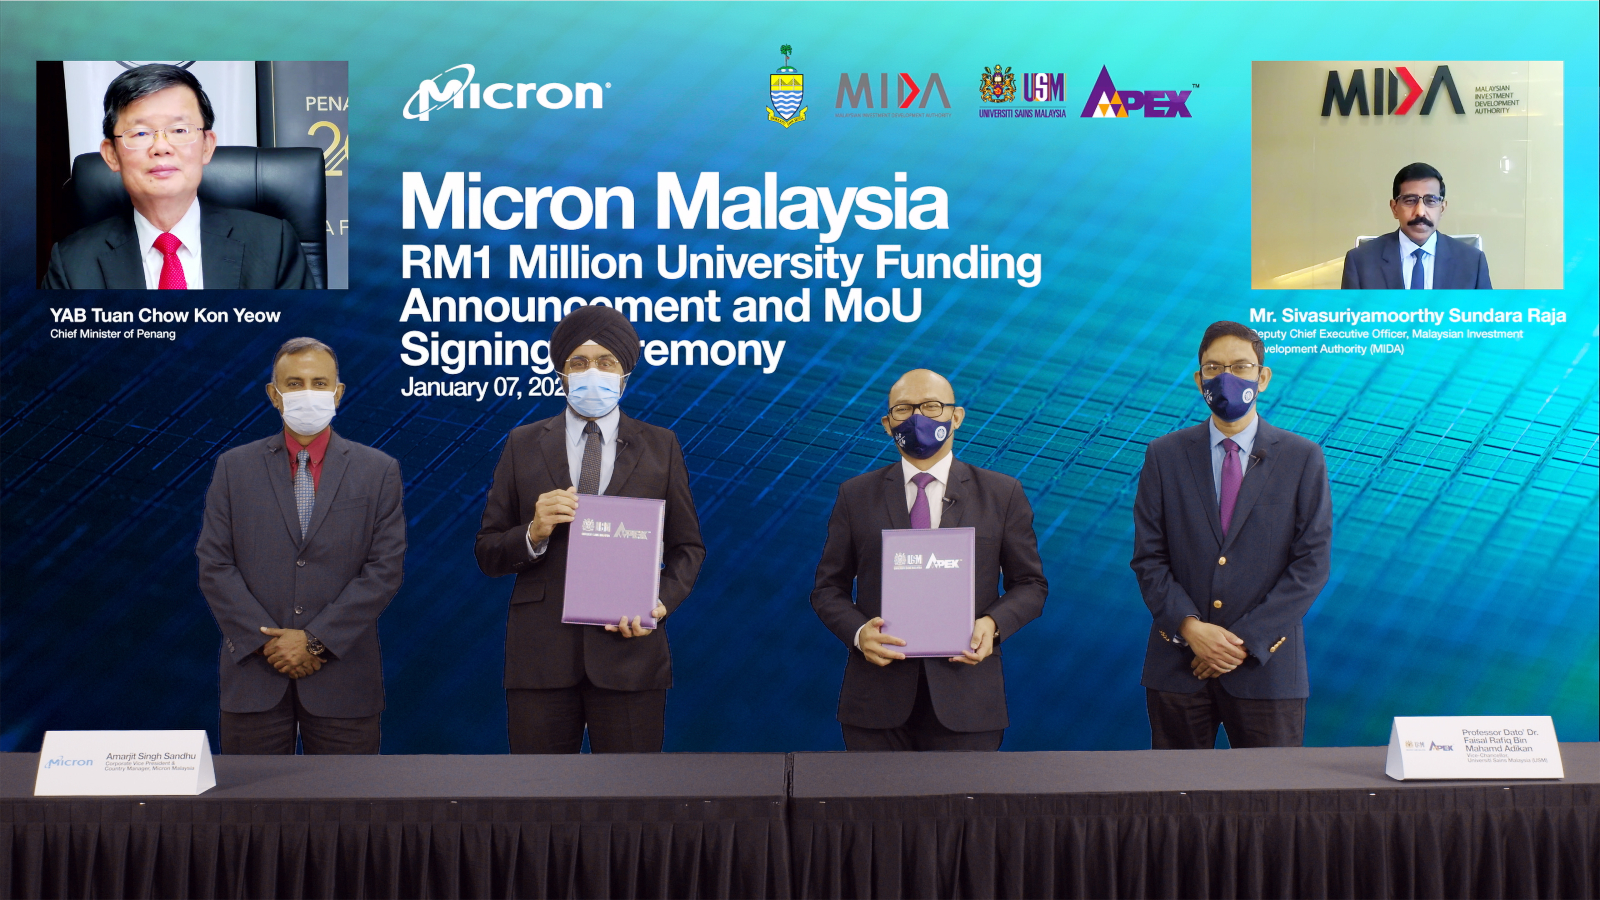 Micron invests to support research at local universities